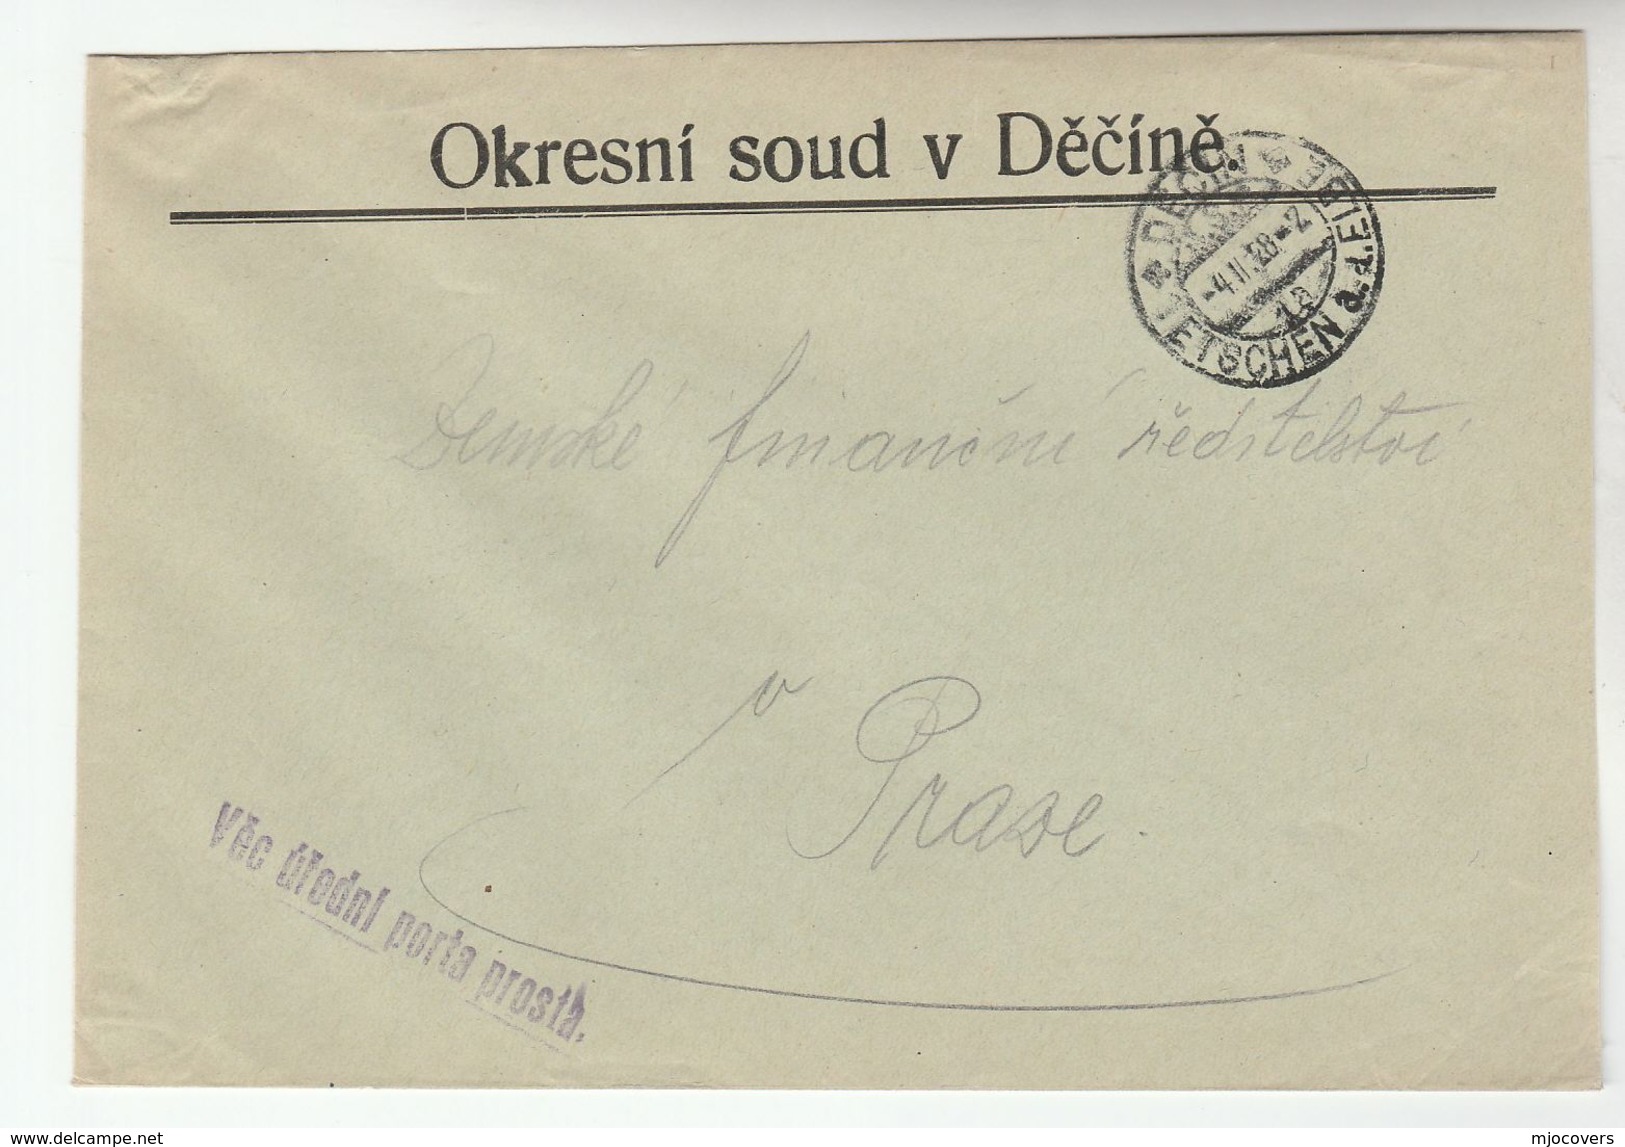 1928 CZECHOSLOVAKIA OFFICIAL Mail COVER  DECIN  DISTRICT COURT  Stamps - Covers & Documents